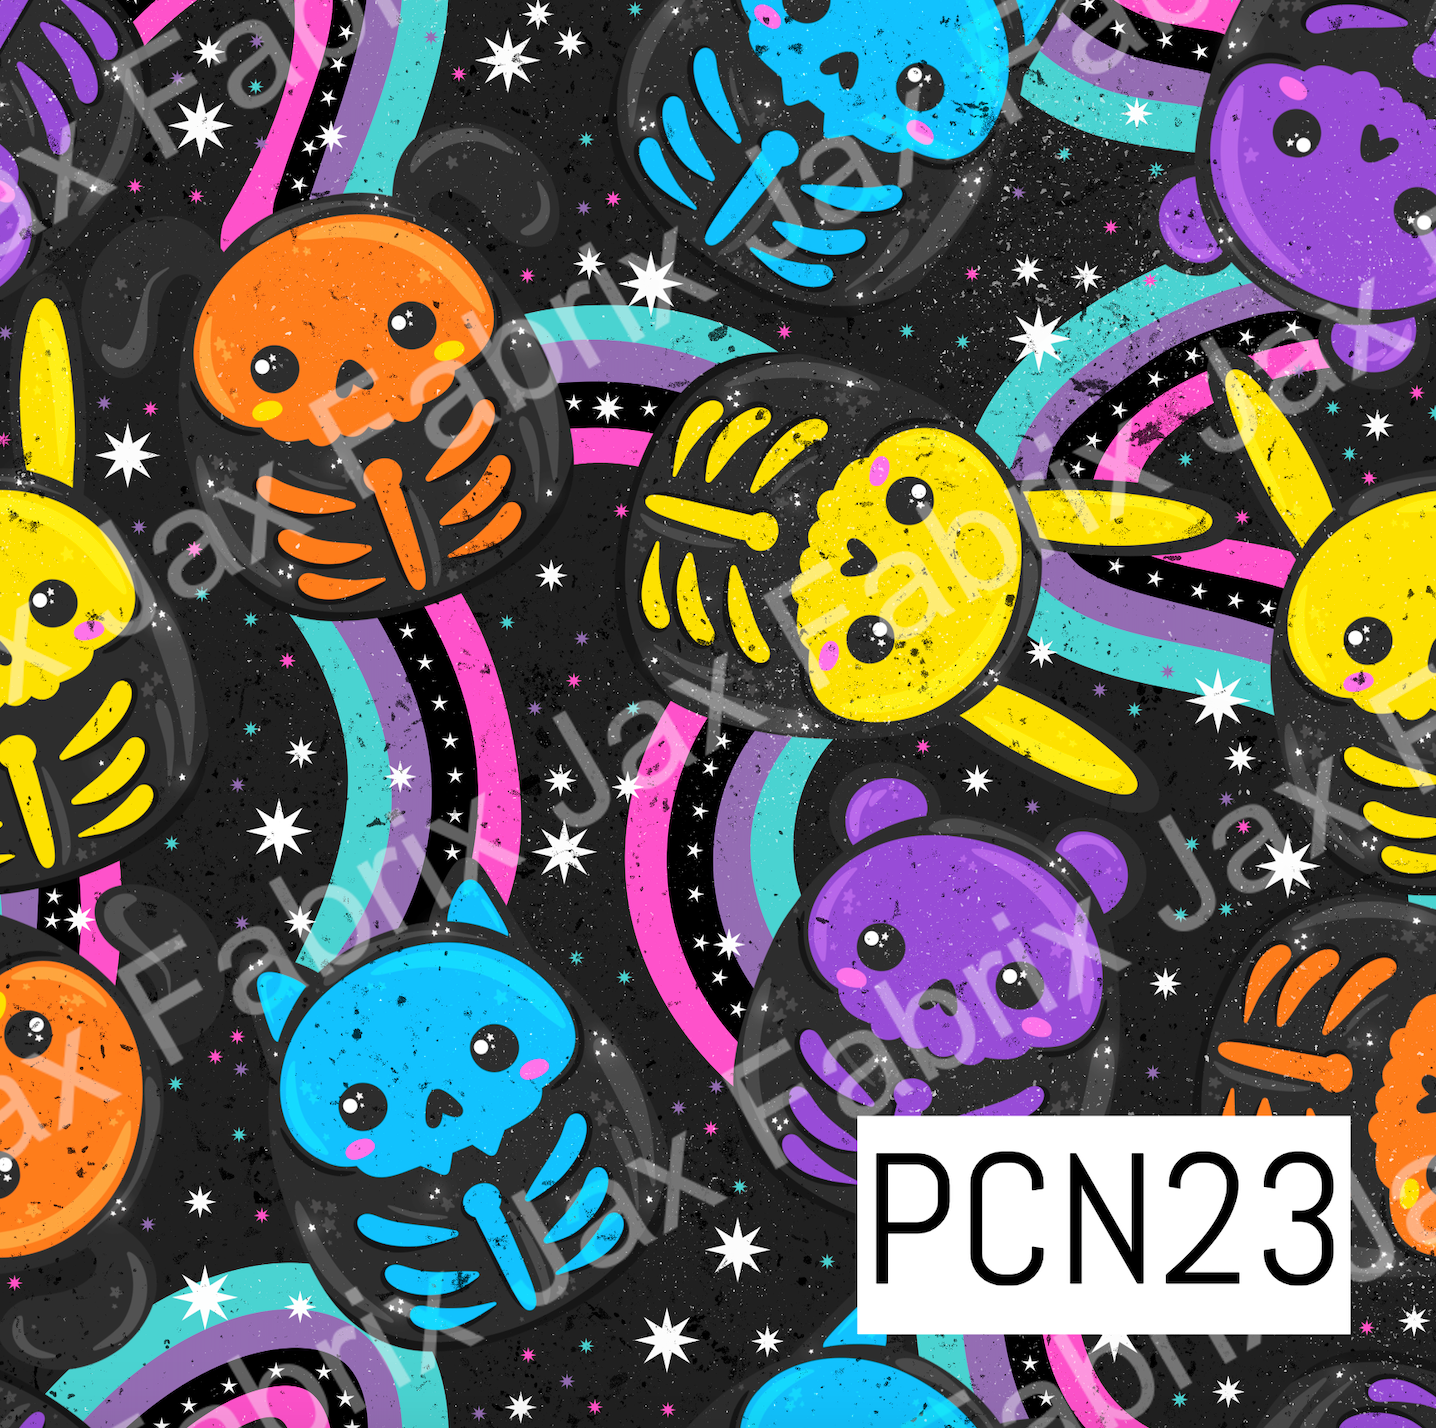 Neon Skelly Squish PCN23